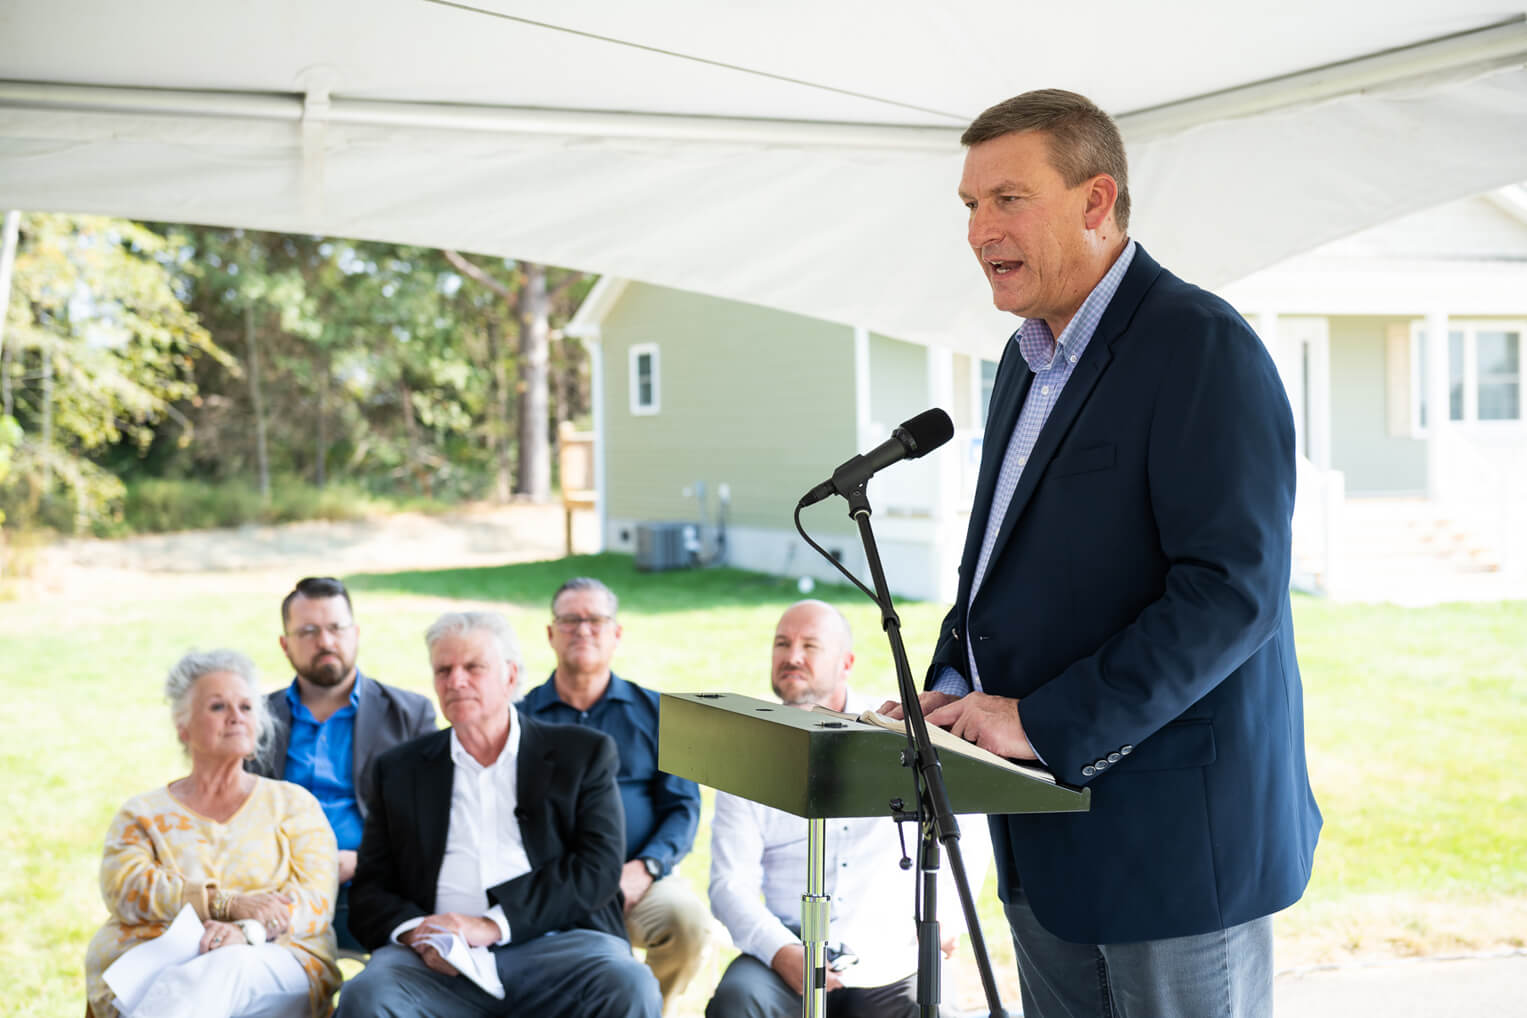 Luther Harrison, vice president of North American Ministries, also spoke at the dedication. About 3,700 Samaritan's Purse volunteers have helped in Mayfield over nearly two years.